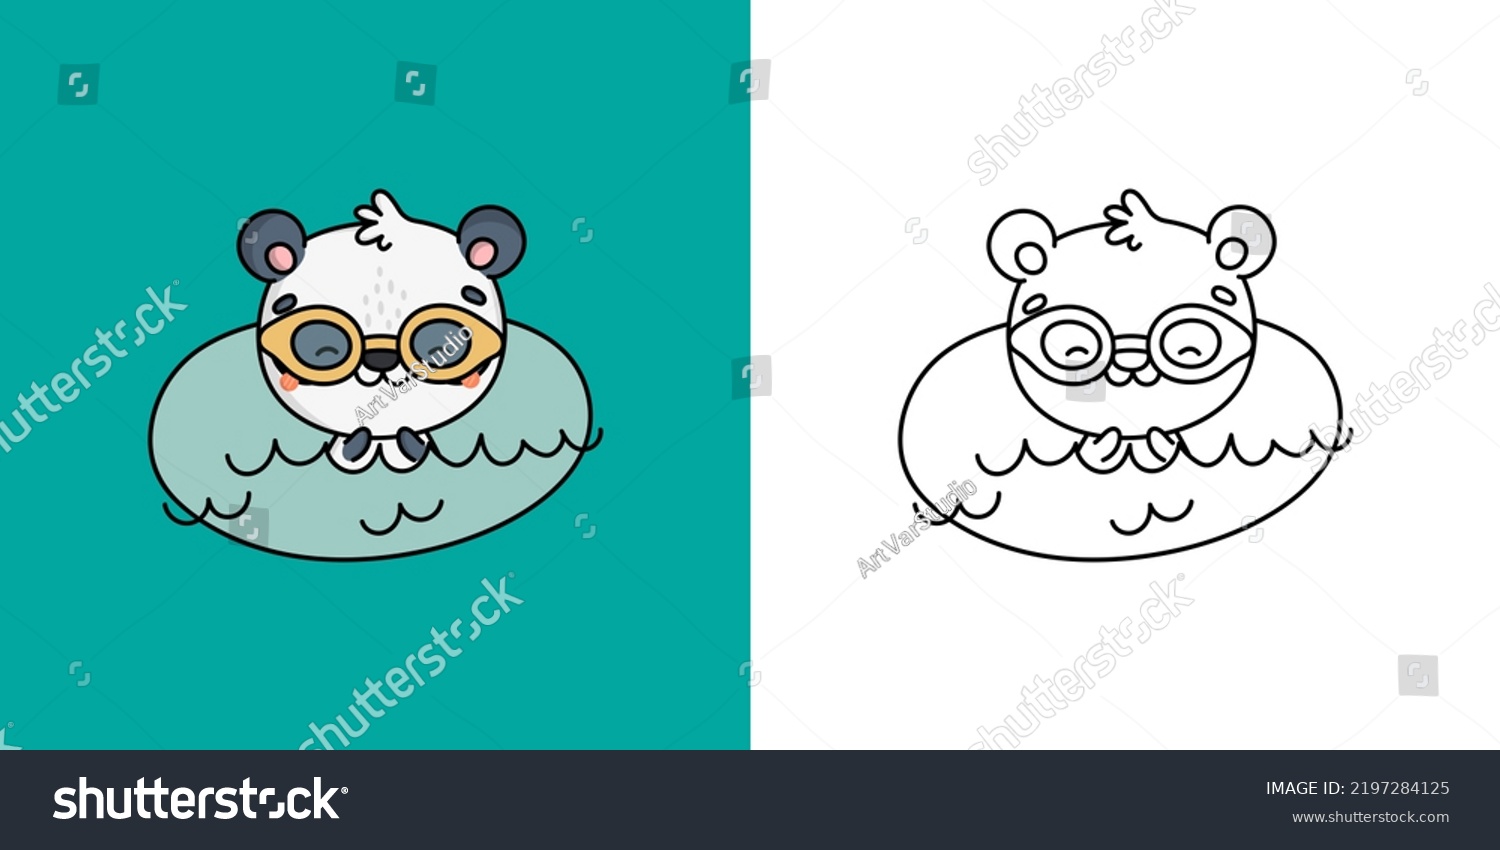 SVG of Panda Sportsman Clipart Multicolored and Black and White. Beautiful Panda Bear Sportsman. Vector Illustration of a Kawaii Animal for Prints for Clothes, Stickers, Baby Shower, Coloring Pages.
 svg